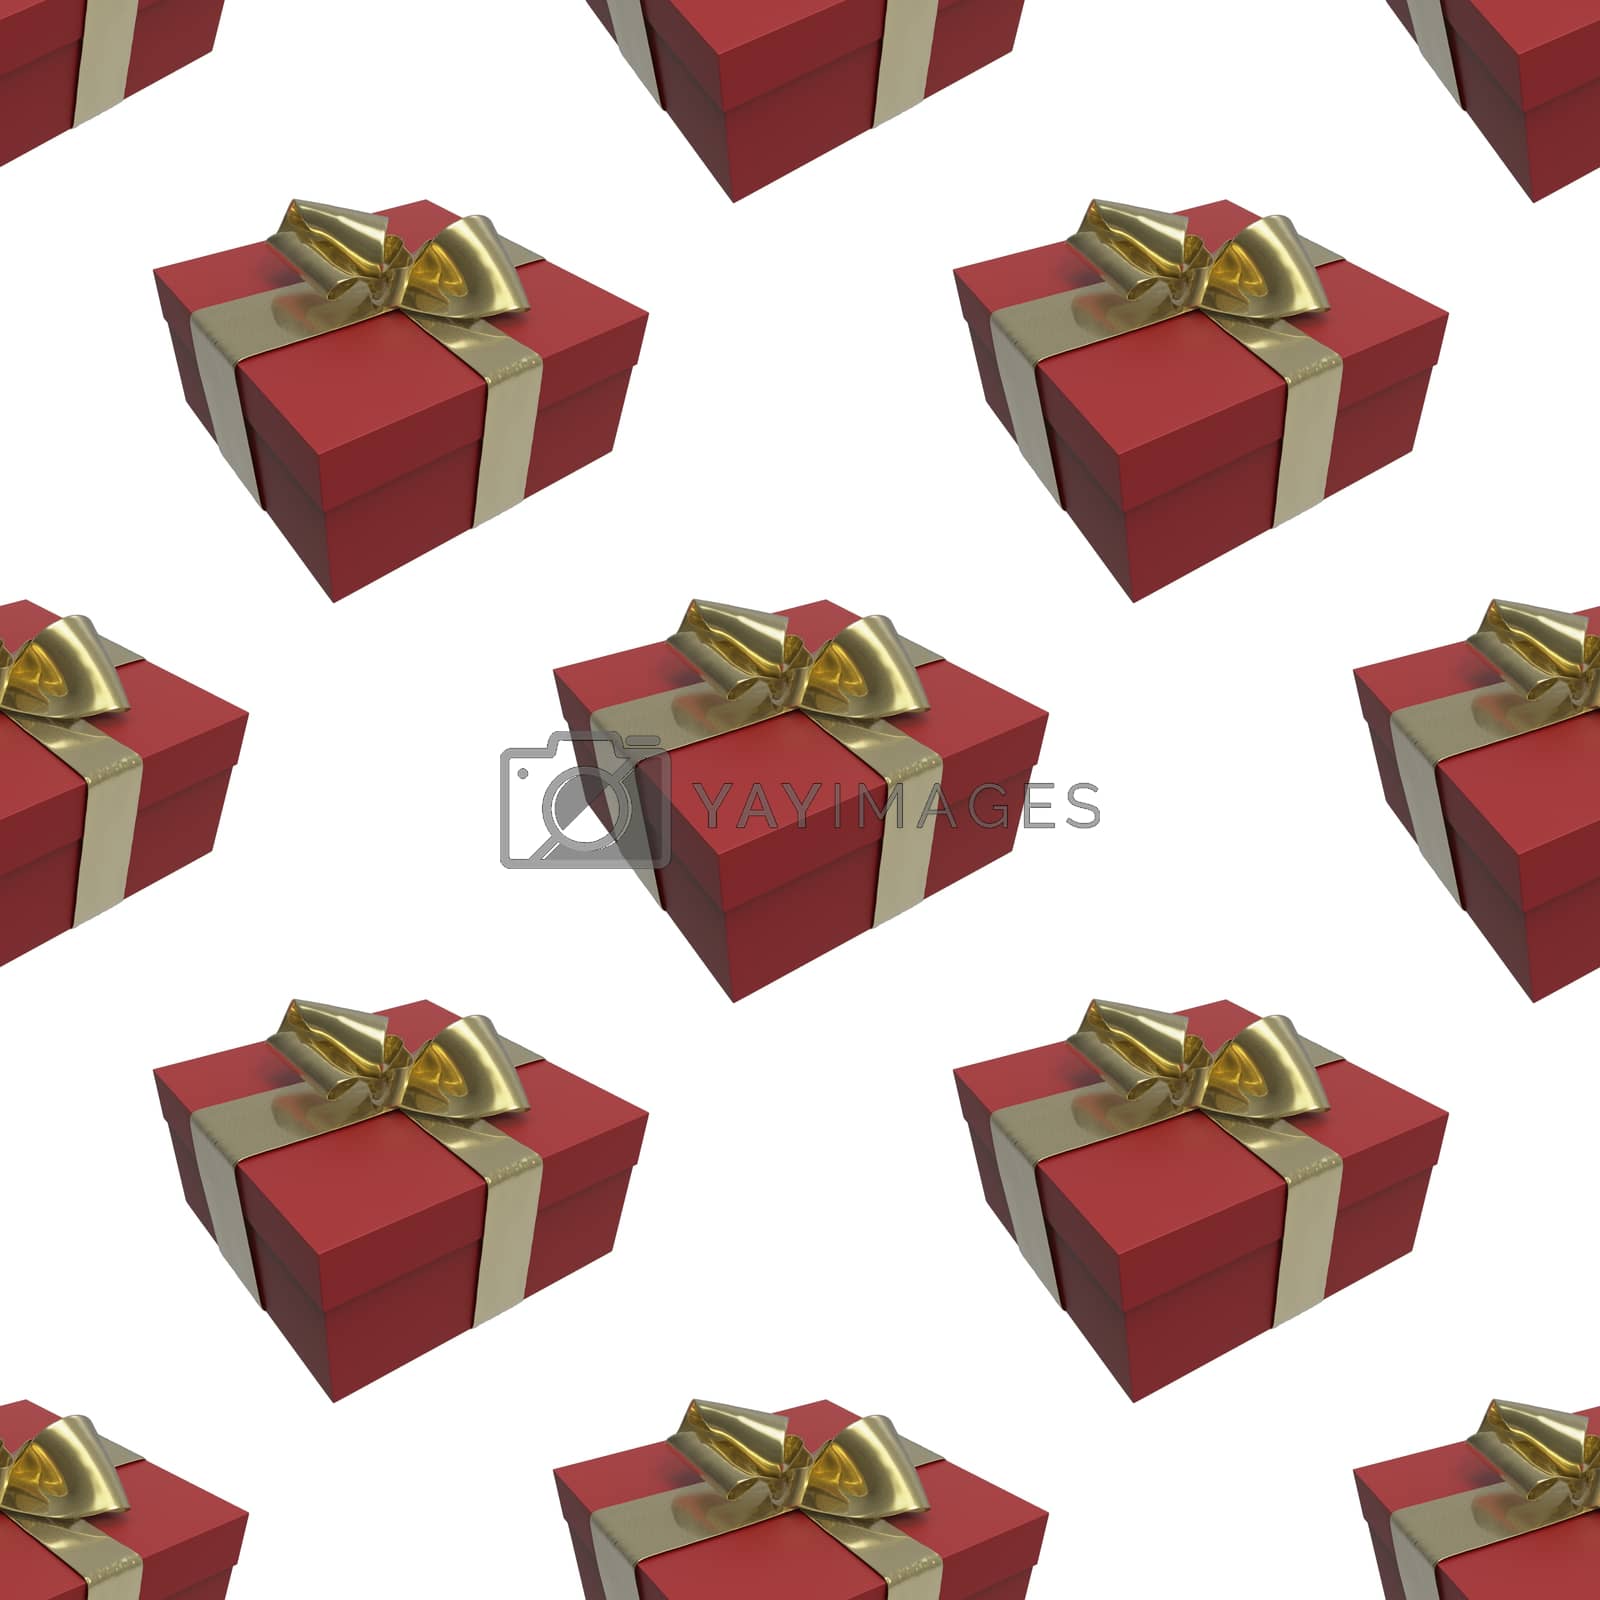 Royalty free image of Colorful and striped red boxes with gifts tied bows on white background. 3d illustration seamless pattern background by skrotov